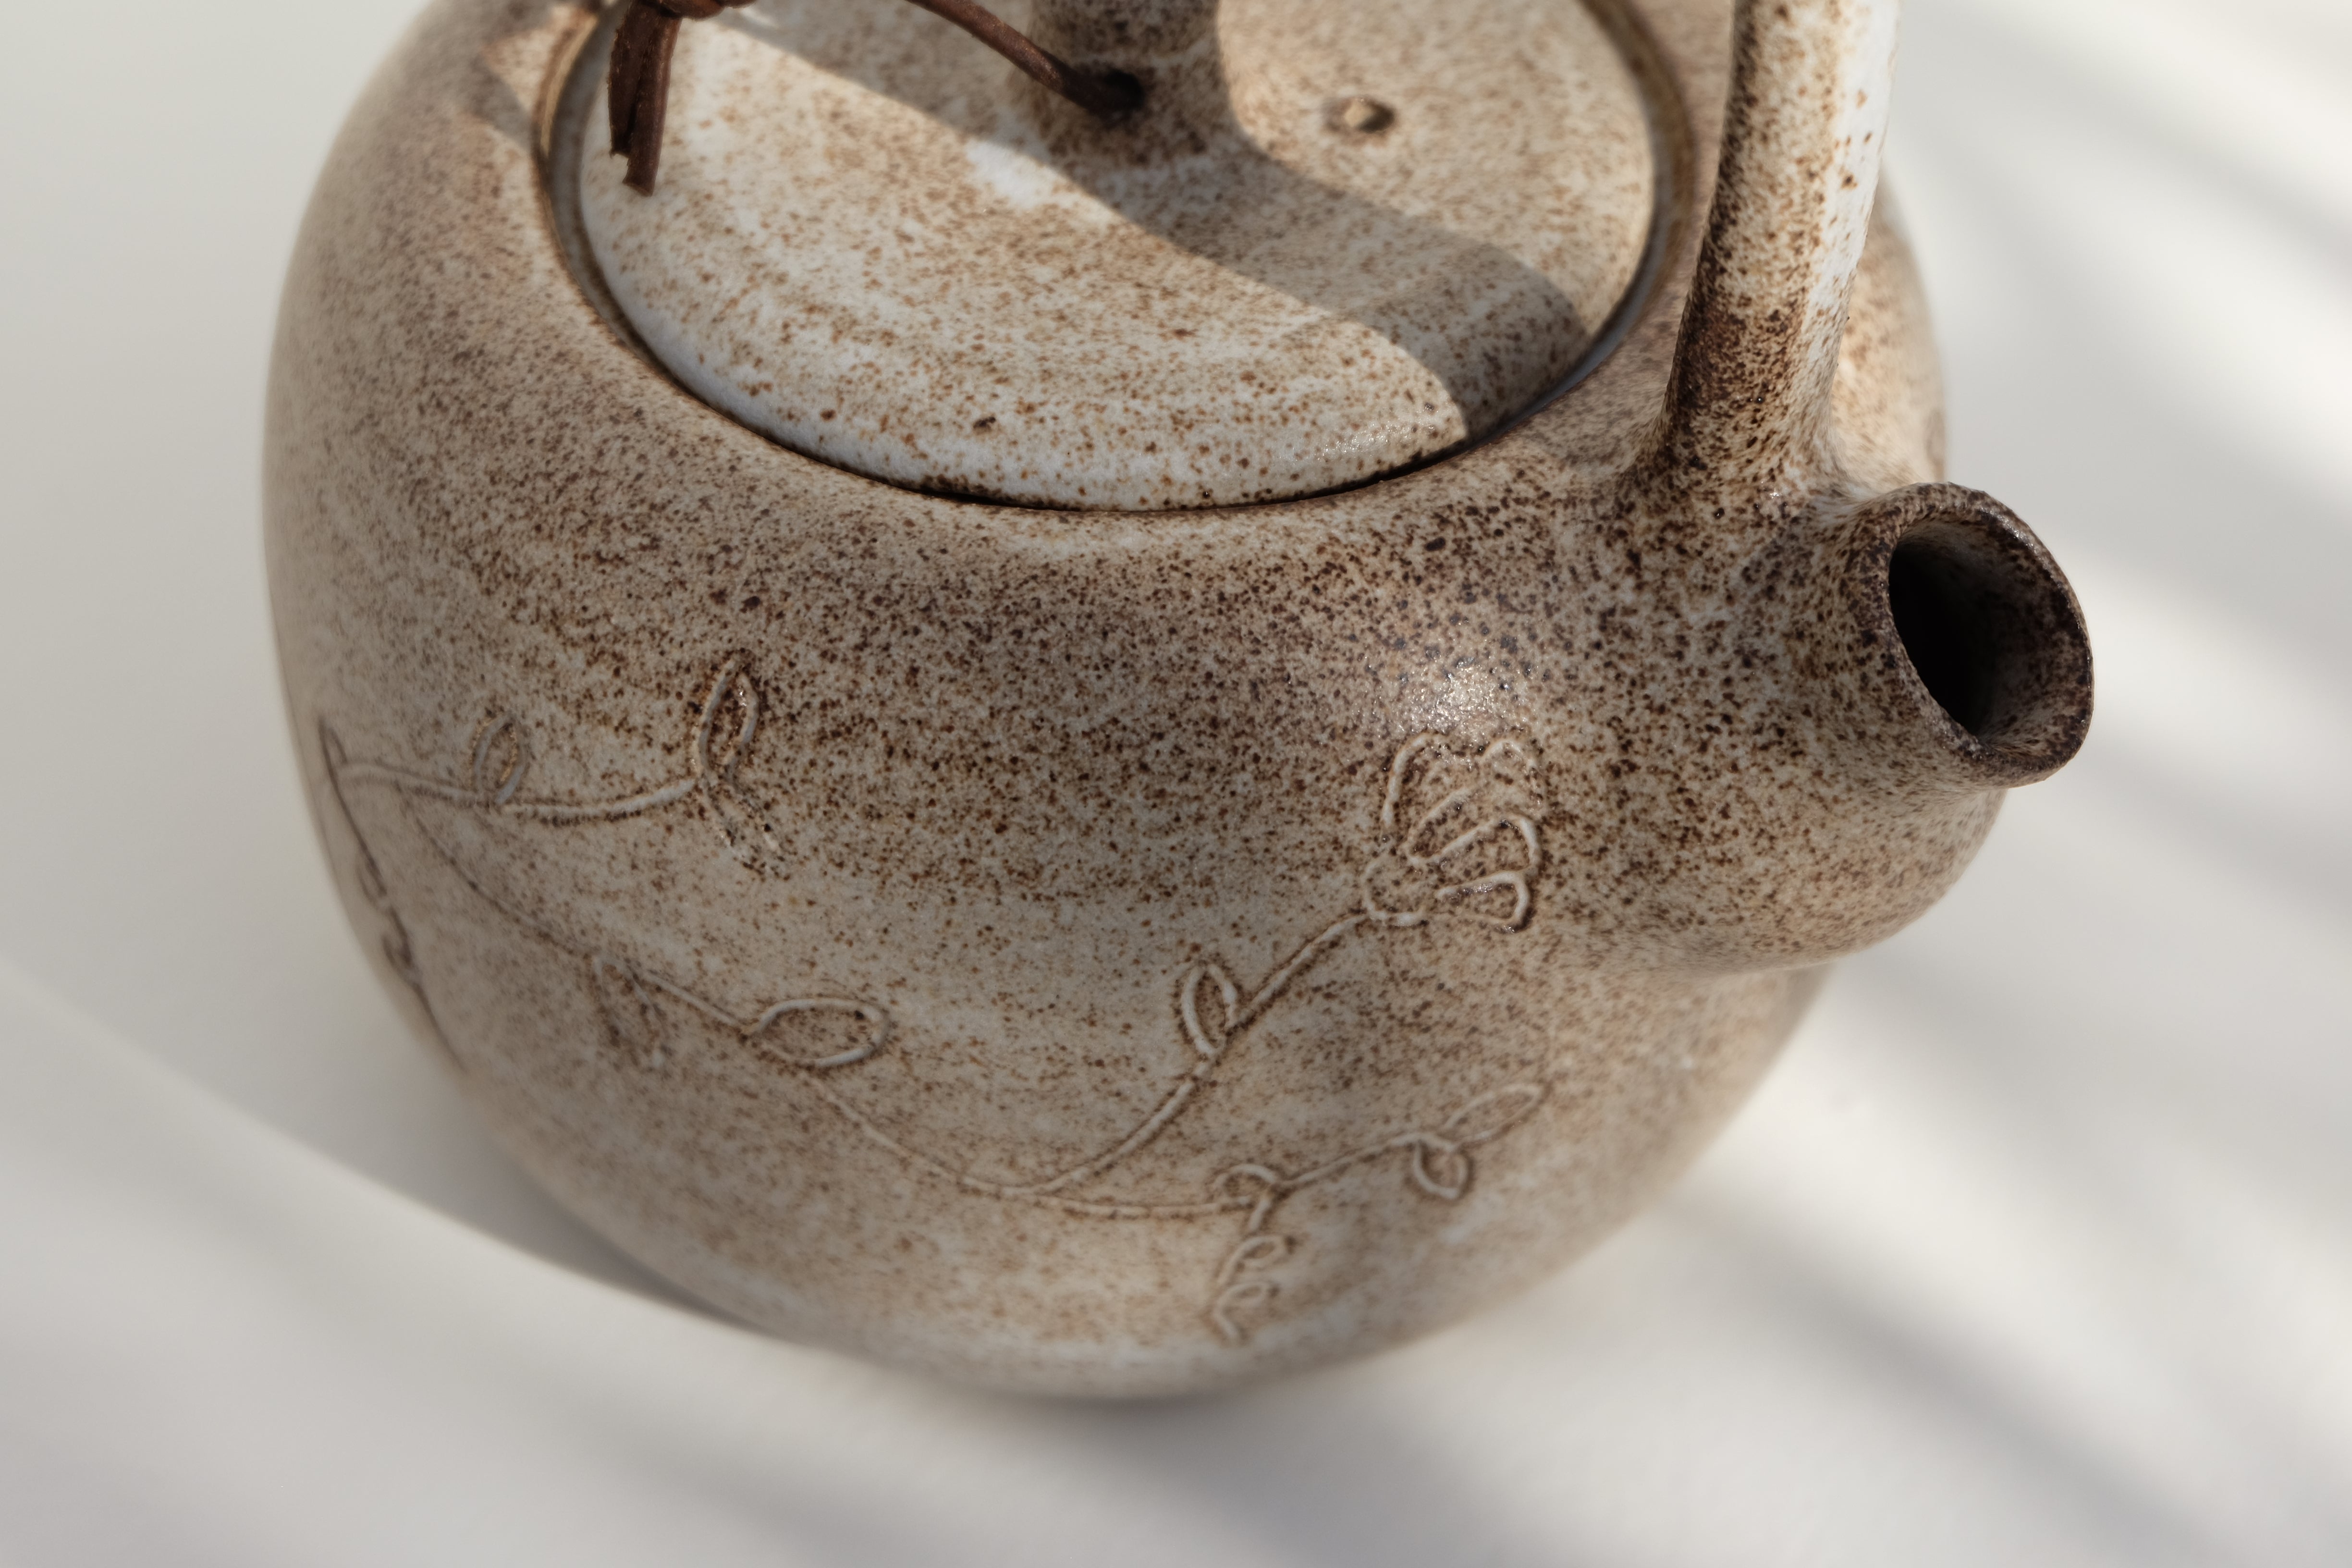 teapot with leather detail